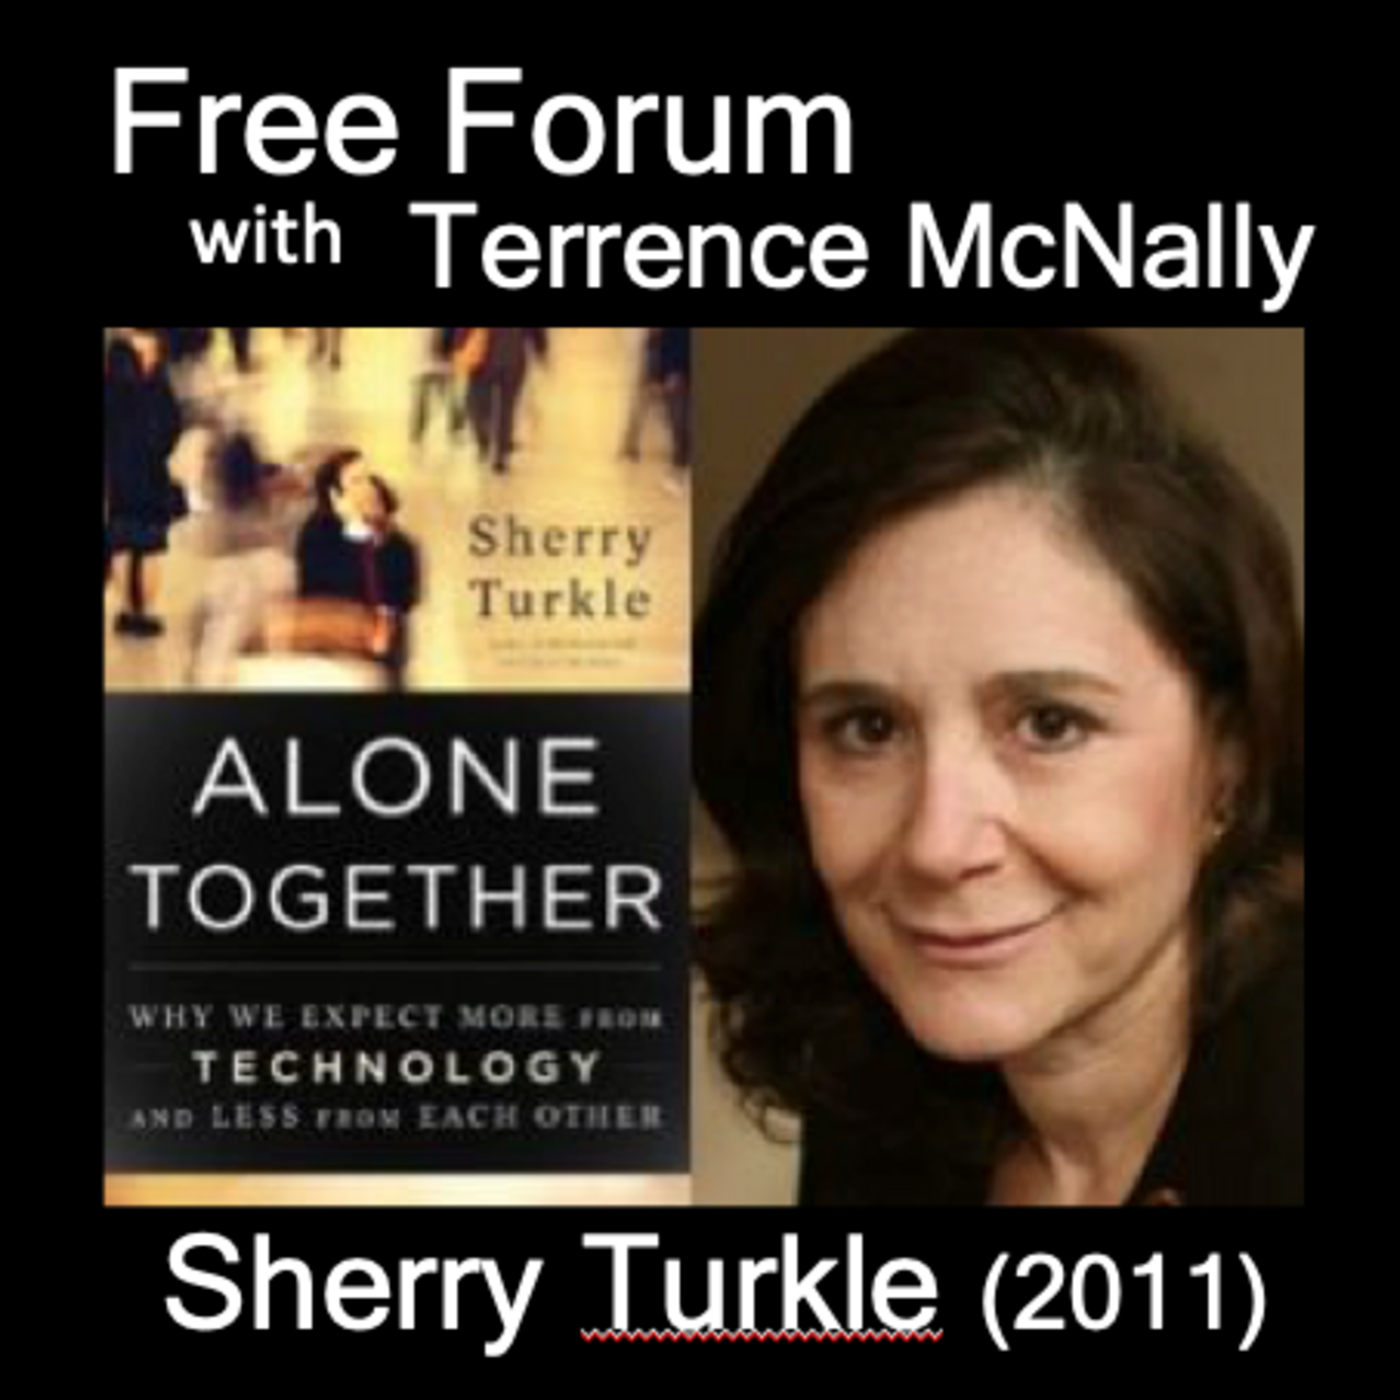 Episode 528: Facebook Doesn’t Care-SHERRY TURKLE(2011)-ALONE TOGETHER: Why We expect More from Technology, Less from Each other